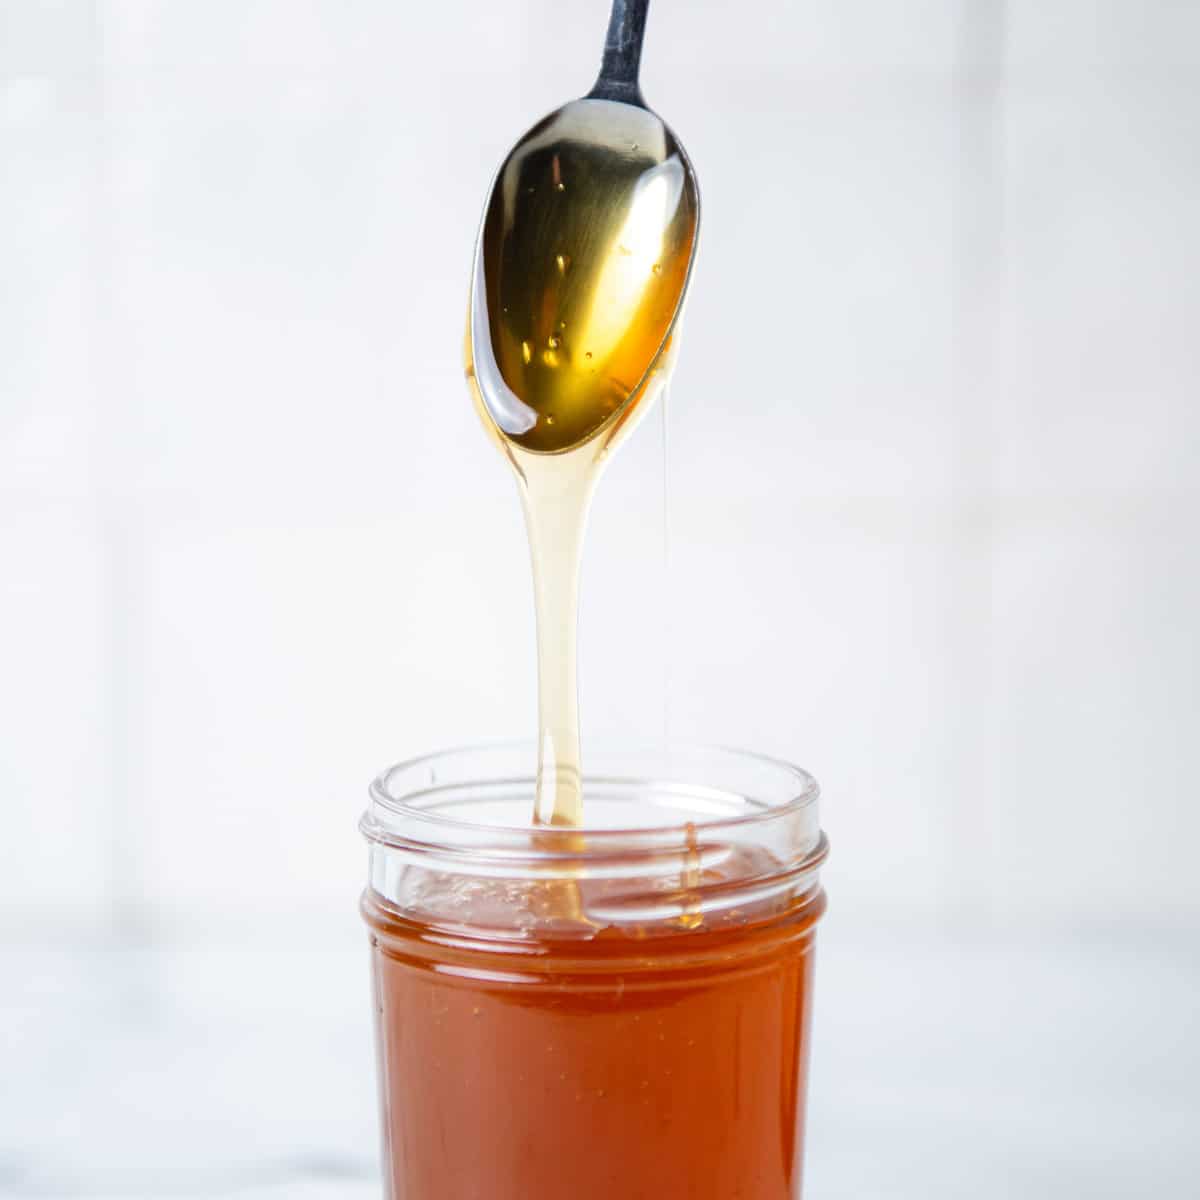 Honey dripping off a spoon into a honey jar.